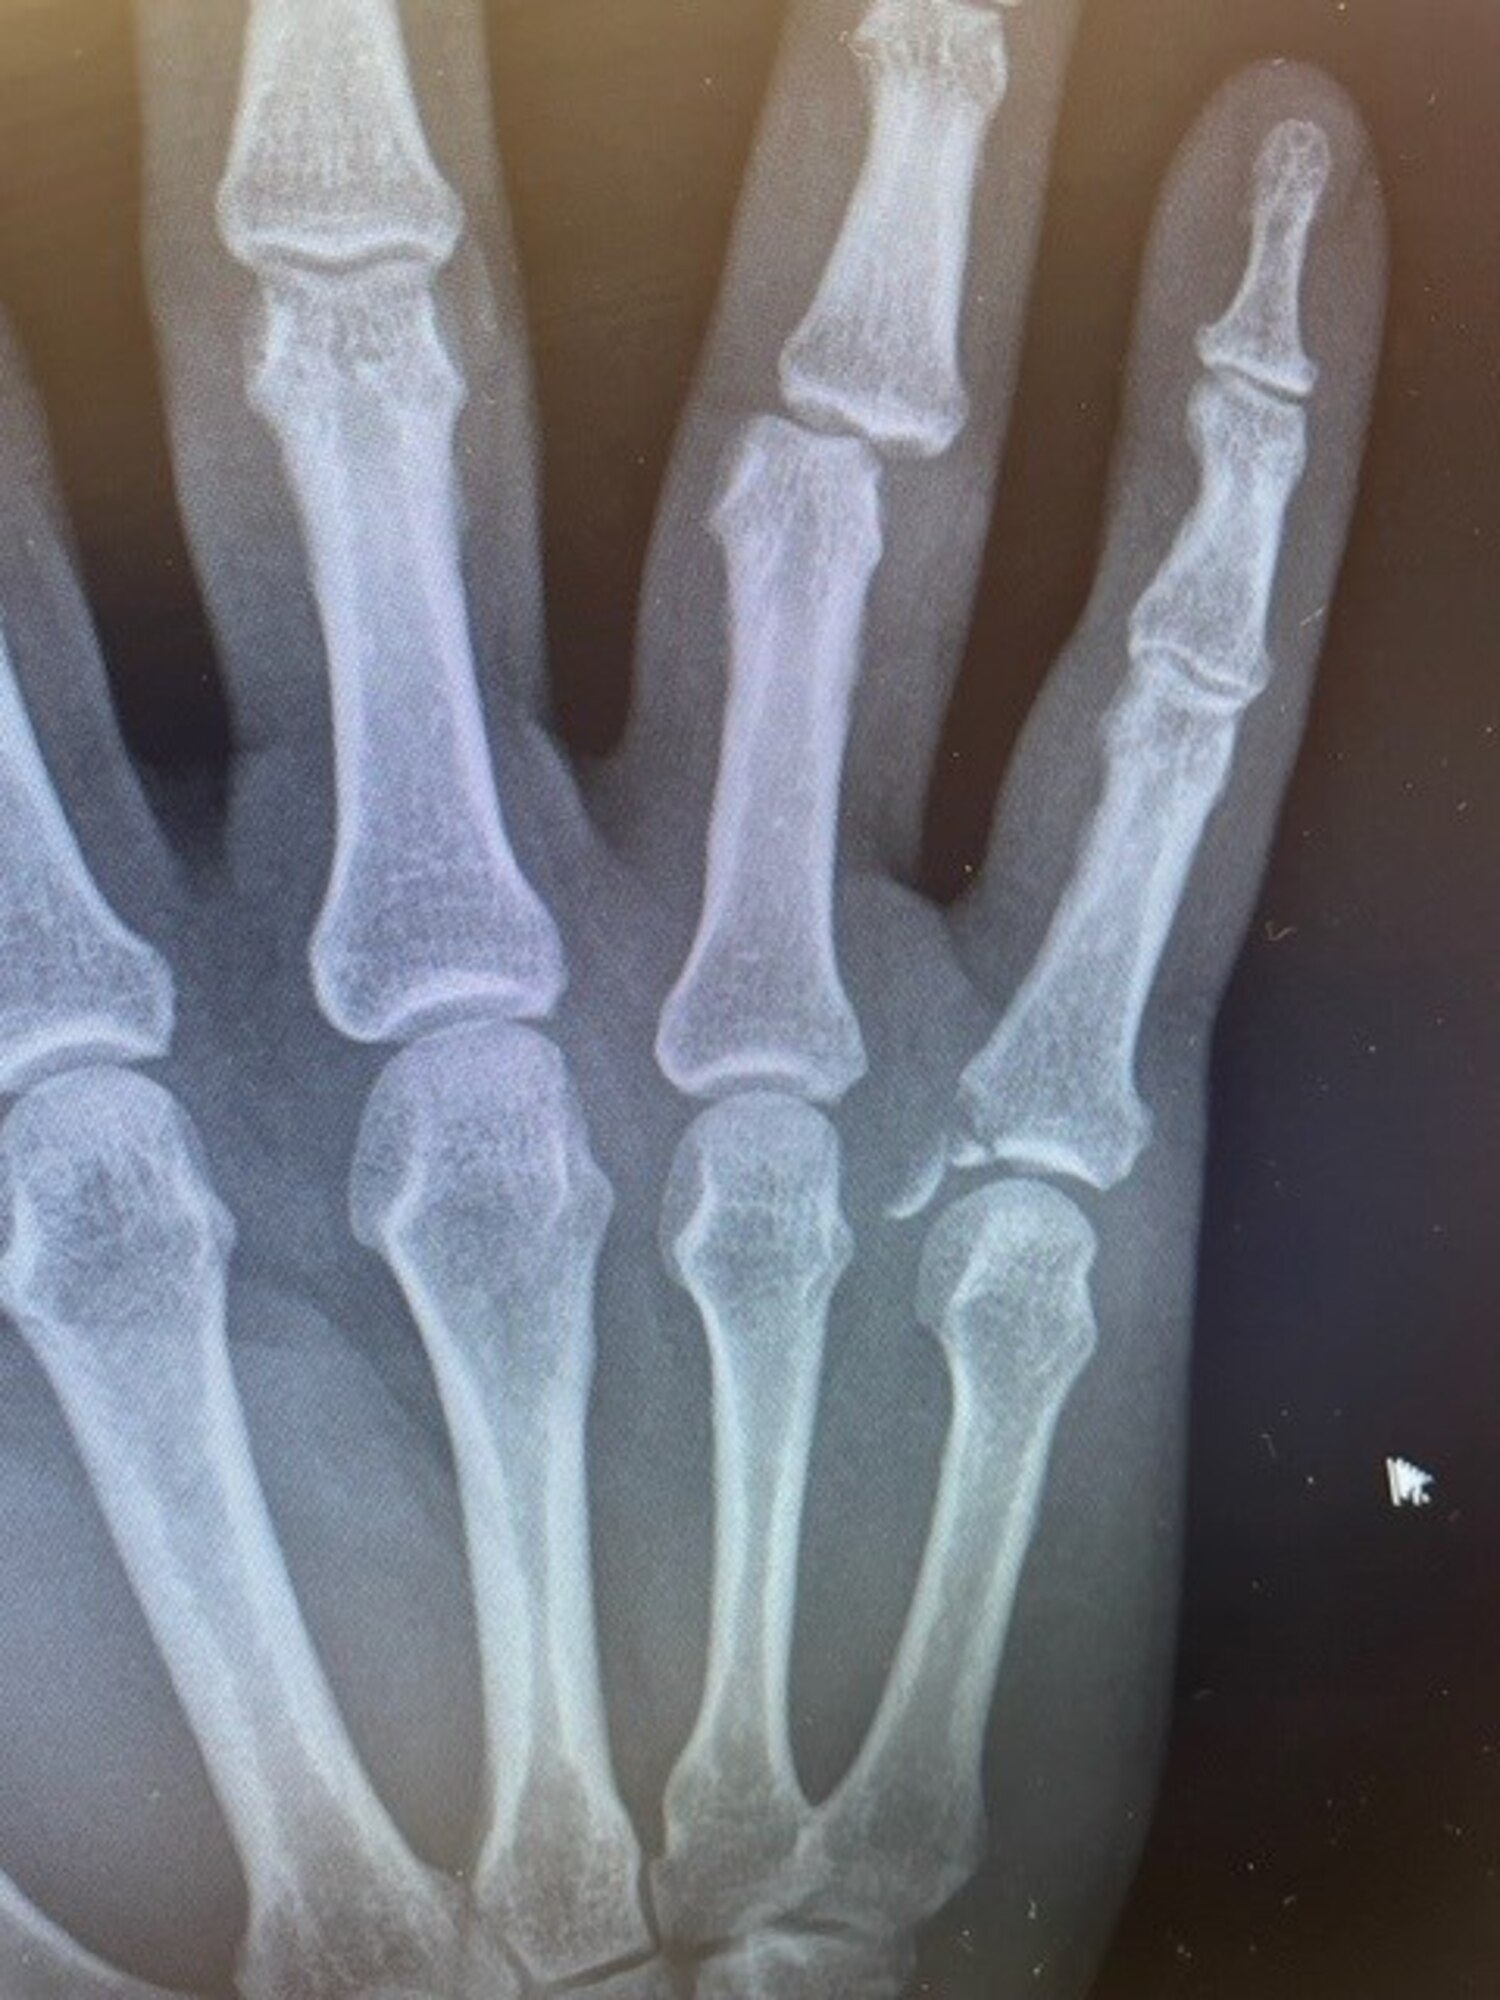 an x-ray of a hand with dislocated fingers